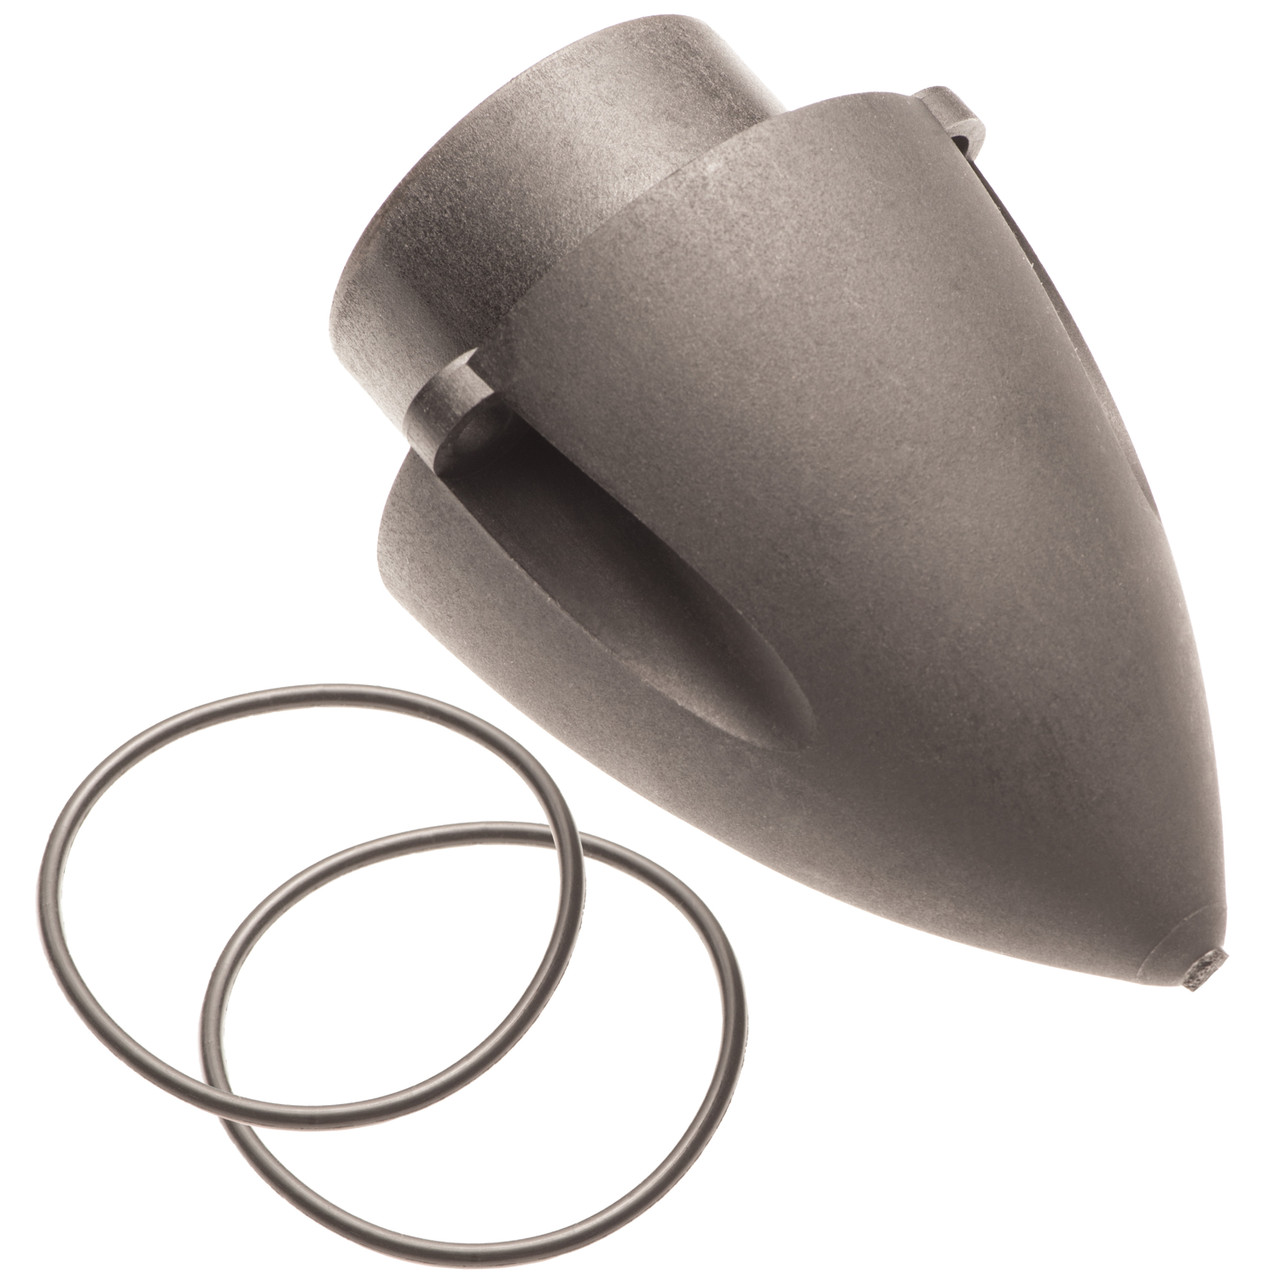 Jet Pump Nose Cone for SeaDoo Spark 900 2up 3up Trixx ACE